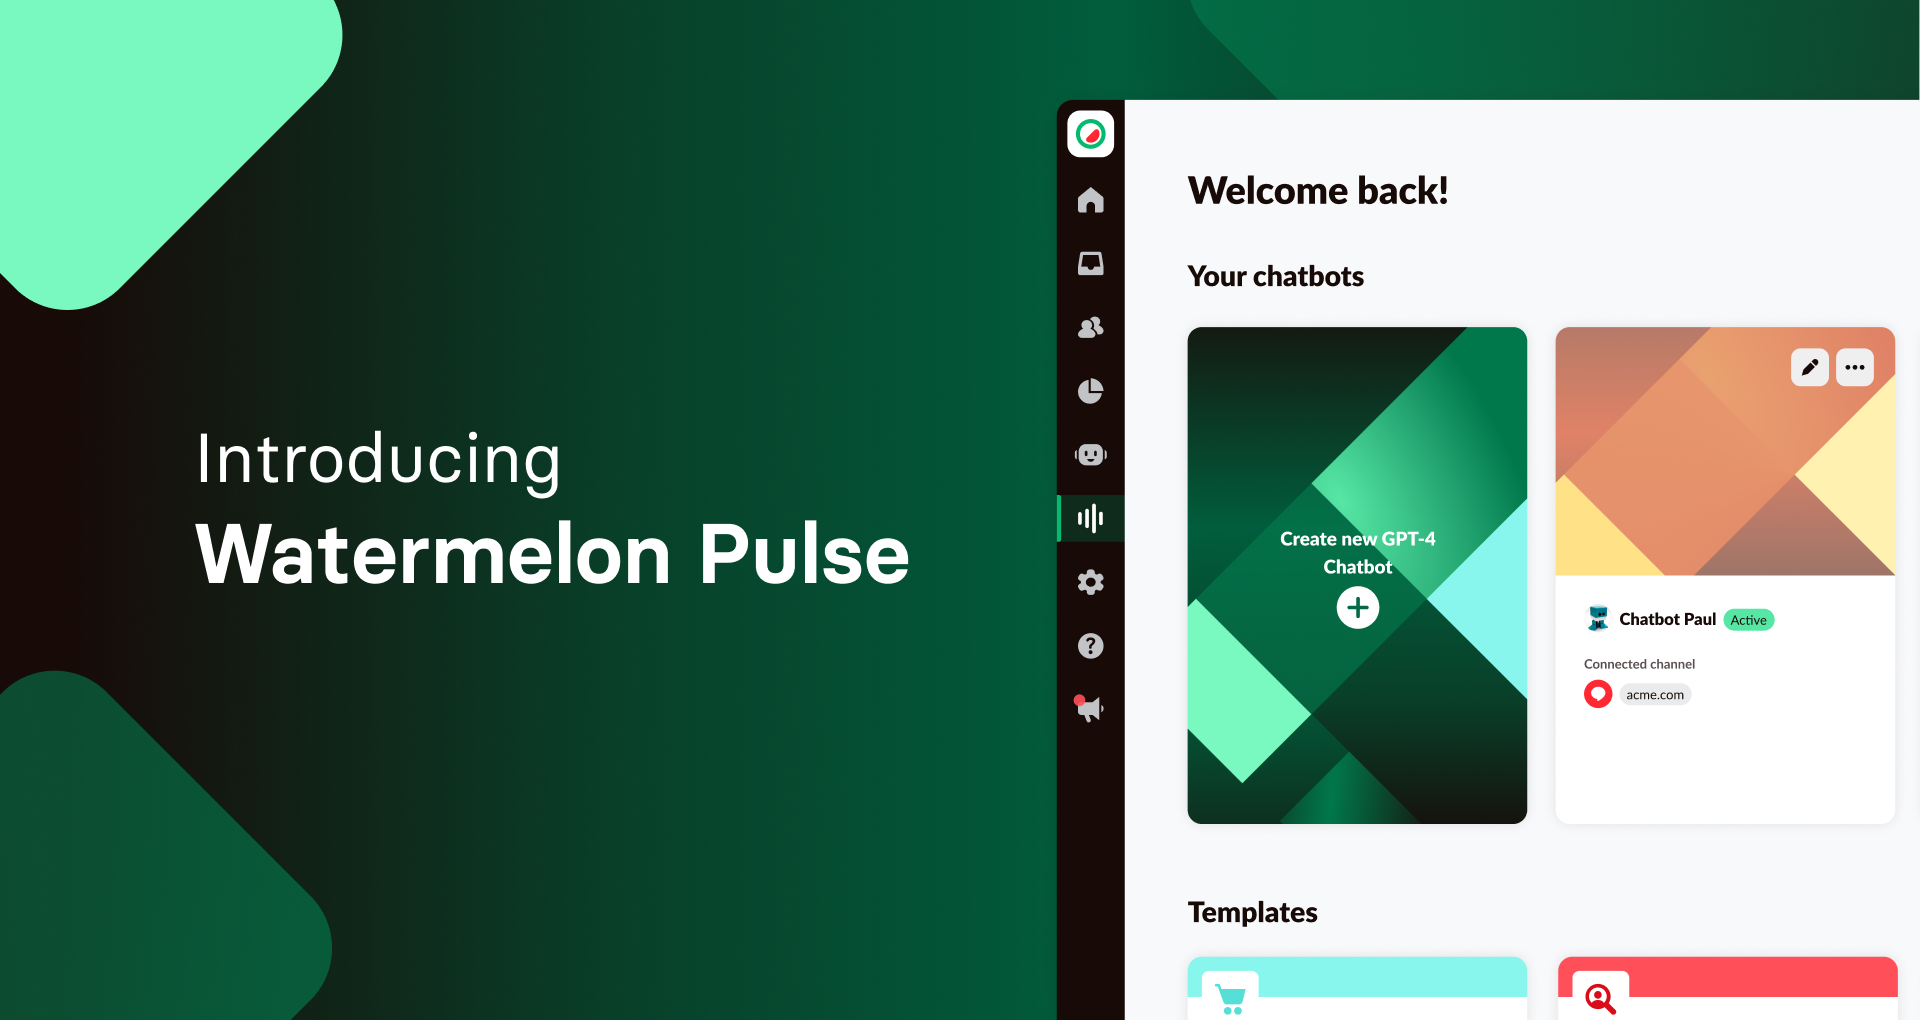 Introduction of Watermelon Pulse